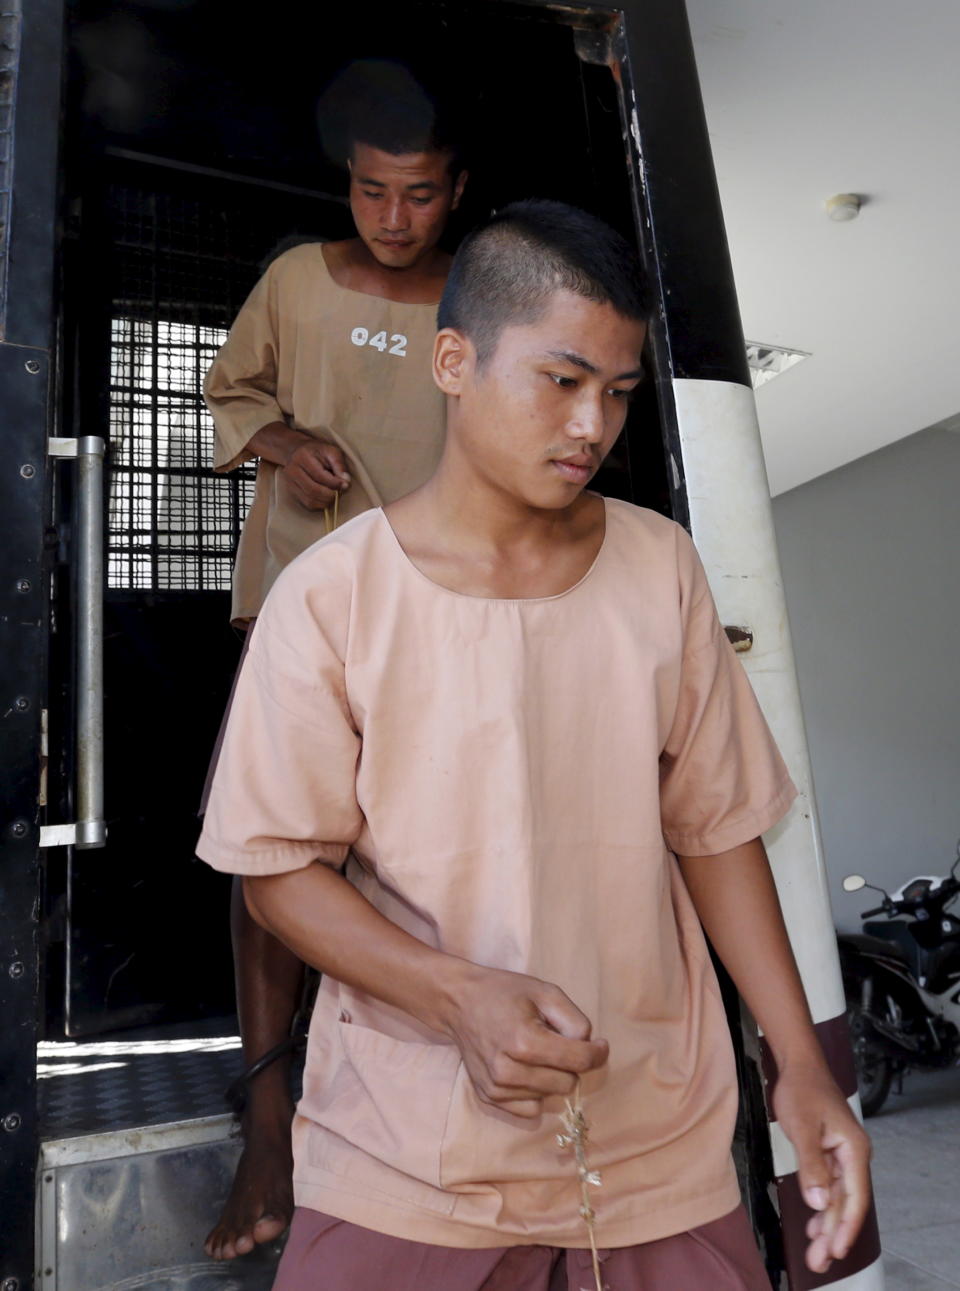 Myanmar migrant workers Zaw Lin (R) and Wai Phyo, also known as Win Zaw Htun, arrive at the Koh Samui Provincial Court, in Koh Samui, Thailand, July 22, 2015. The two men are on trial for the murder of Hannah Witheridge, 23, and David Miller, 24, in September last year on a beach on Koh Tao, an island popular with backpackers and divers. REUTERS/Chaiwat Subprasom